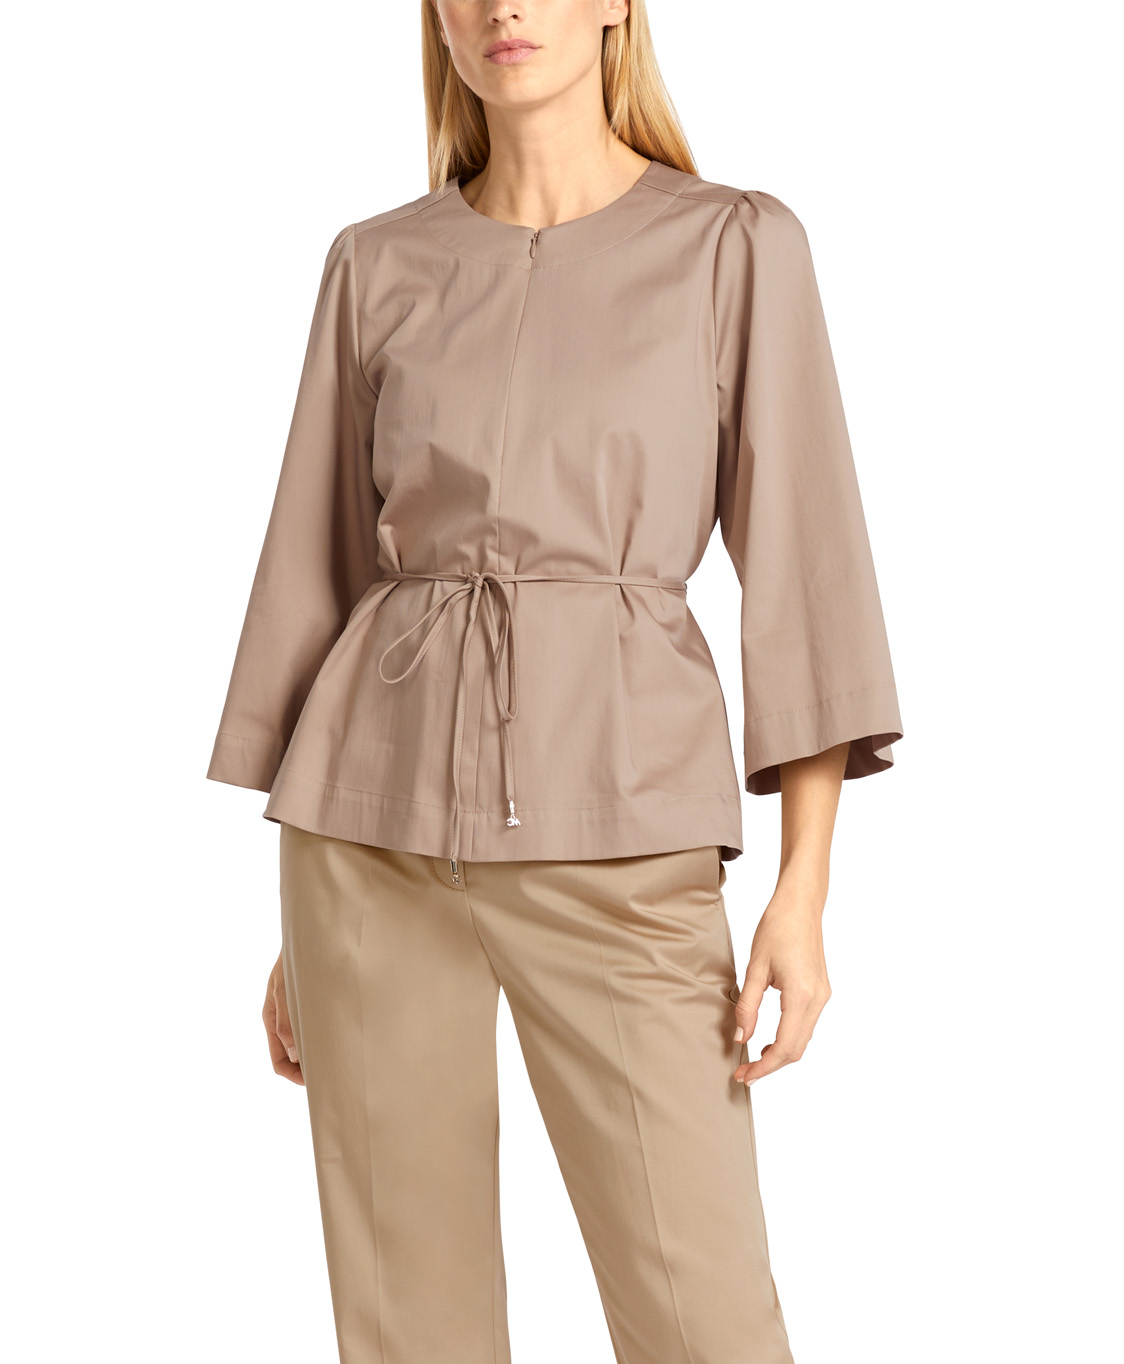 Marccain Collectie Blouse Uc 51.23 W90 Beige